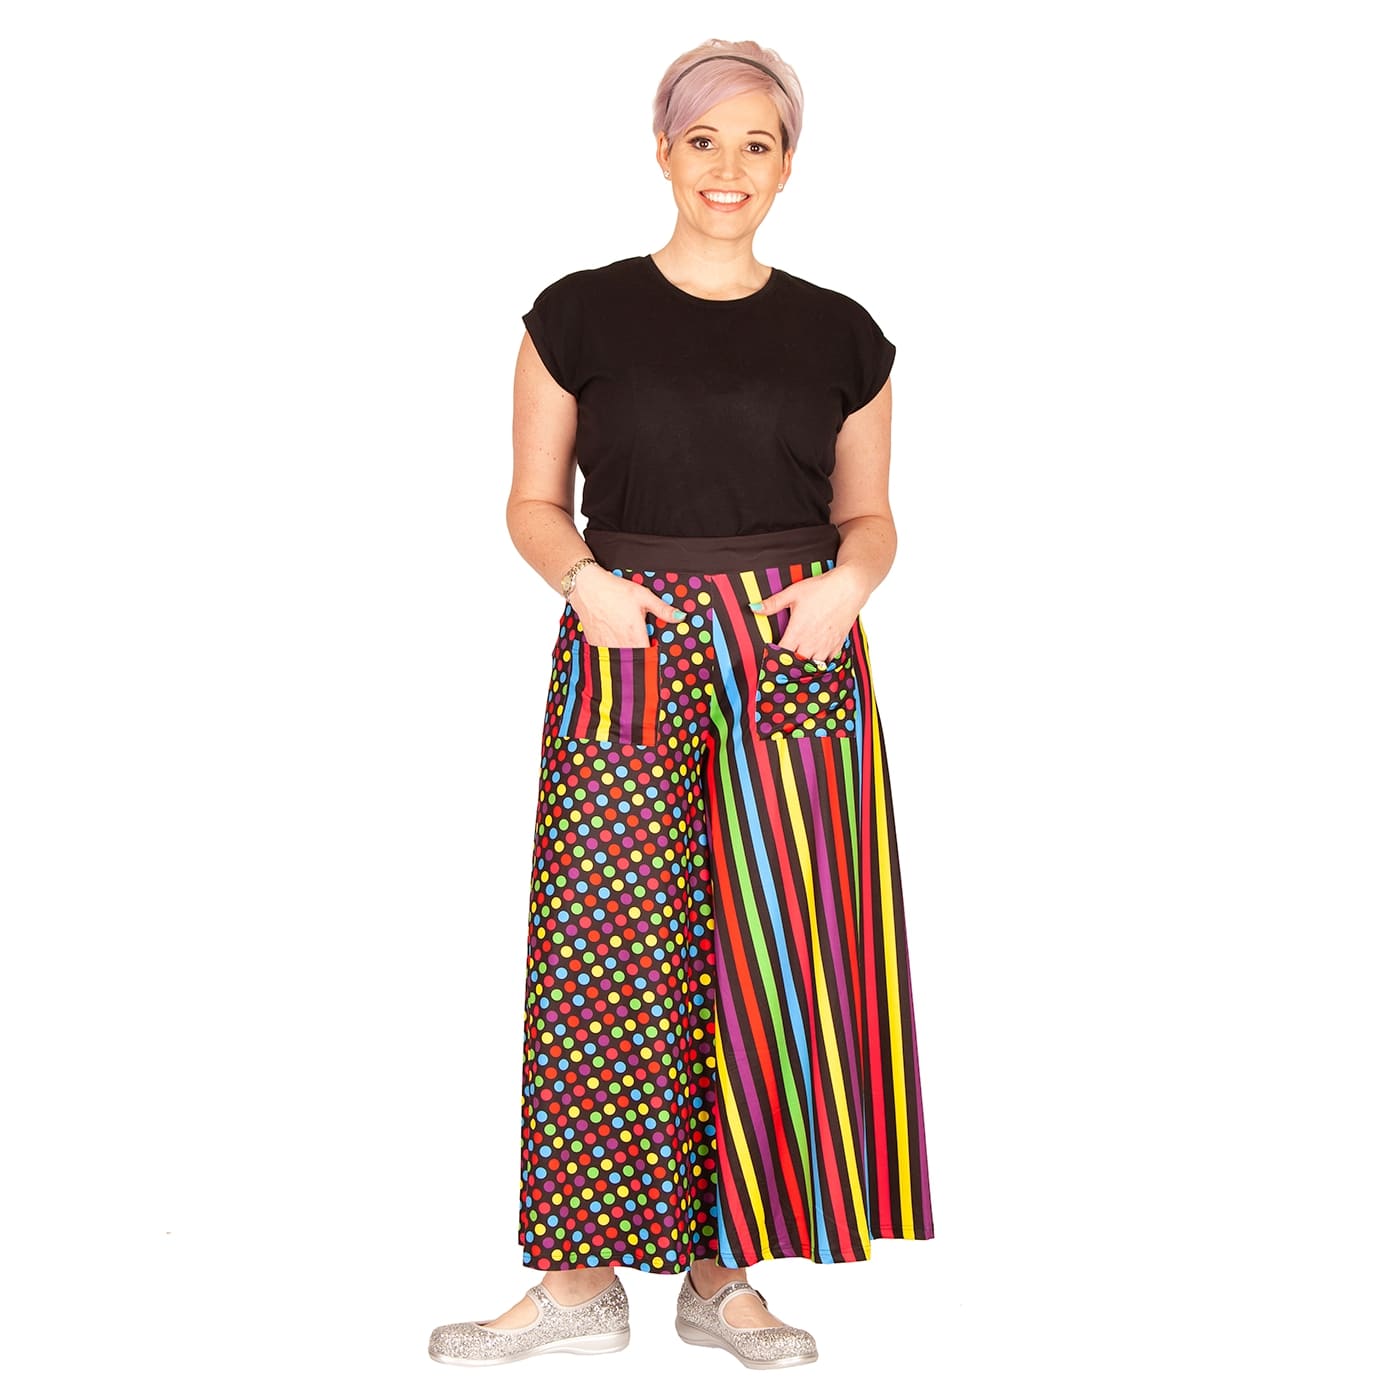 Confetti Wide Leg Pants by RainbowsAndFairies.com (Rainbow Colours - Polka Dots - Stripes - Vibrant - Pallazo Pants - Vintage Inspired - Pants With Pockets) - SKU: CL_WIDEL_CONFT_ORG - Pic 02